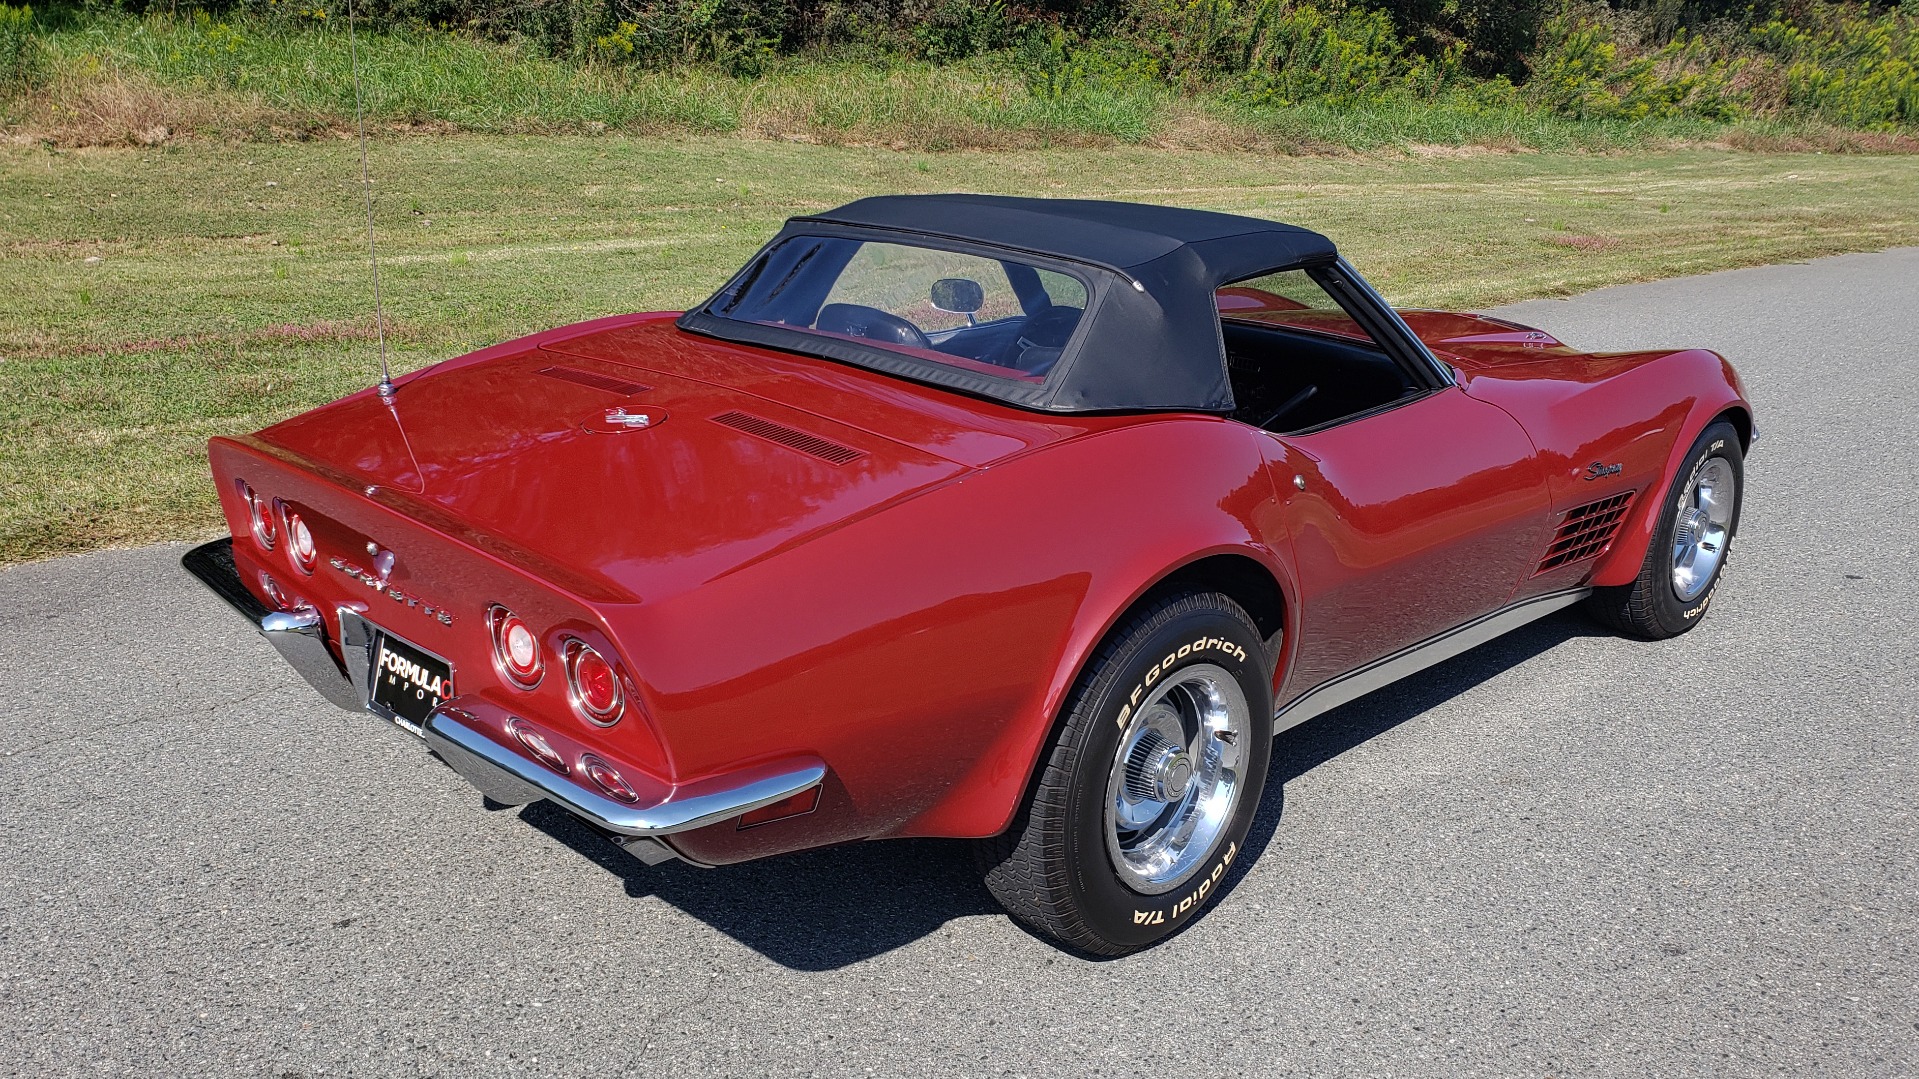 Used 1970 Chevrolet CORVETTE CONVERTIBLE / 454CI V8 / AUTO / NEW BLACK TOP / NUMBERS MATCH for sale Sold at Formula Imports in Charlotte NC 28227 11